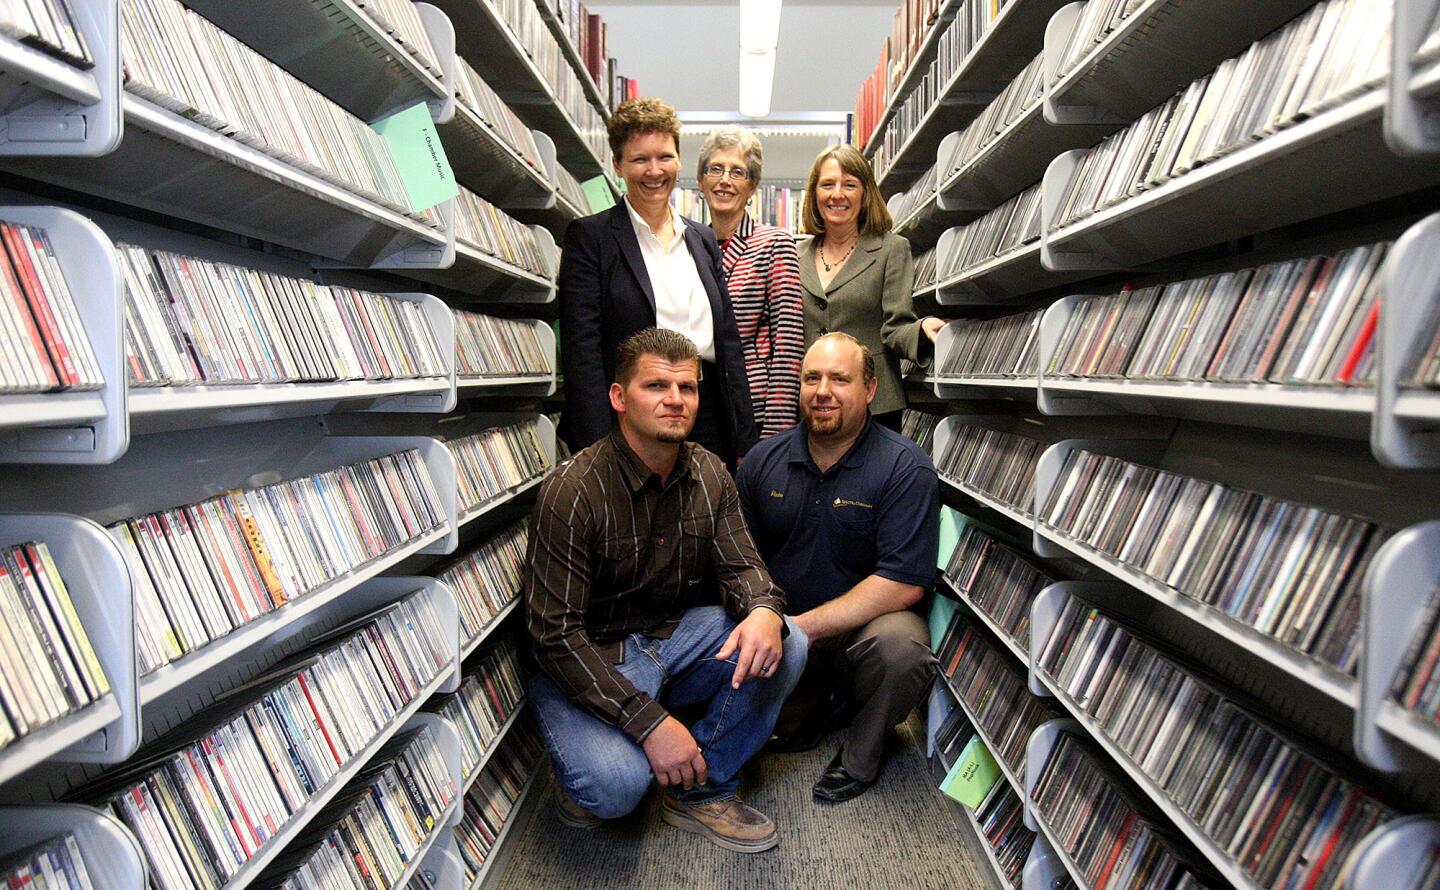 The remodeling team of Troy Parra, project manager with Spectra Company, Rueben Lombardo, project manager with Spectra Company, Debra Gerod, architect with Gruen Associates, Carolyn Flemming, library arts and culture building administrator, and Cindy Cleary, director of library arts and culture, stand in stacks loaded with CDs that are taller, an idea that allowed for several shelves of books to be relocated to different parts of the Brand Library without losing any shelf space in Glendale on Tuesday, March 25, 2014. The library, which as gone through extensive renovation and repair, will reopen again on Thursday. (Tim Berger/Staff Photographer)